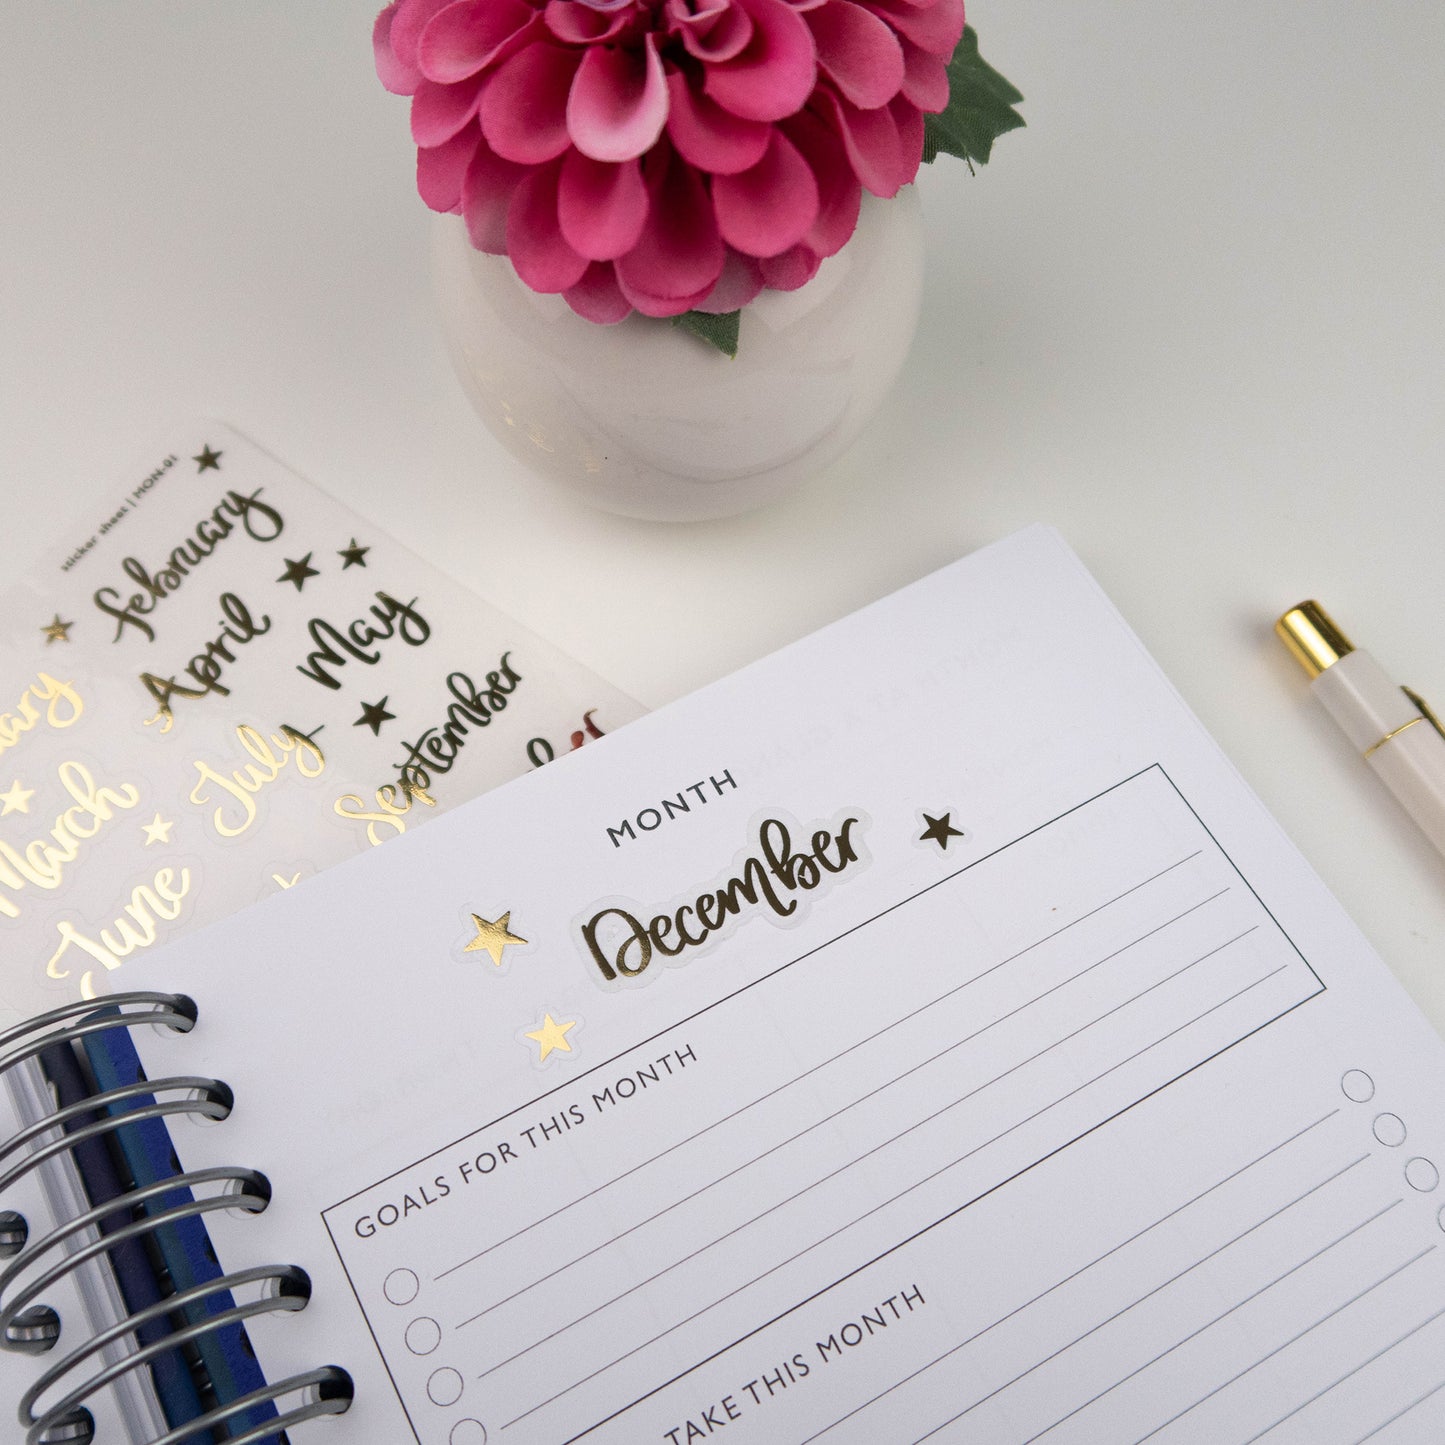 STAR SIGN - PERSONALISED PLANNER